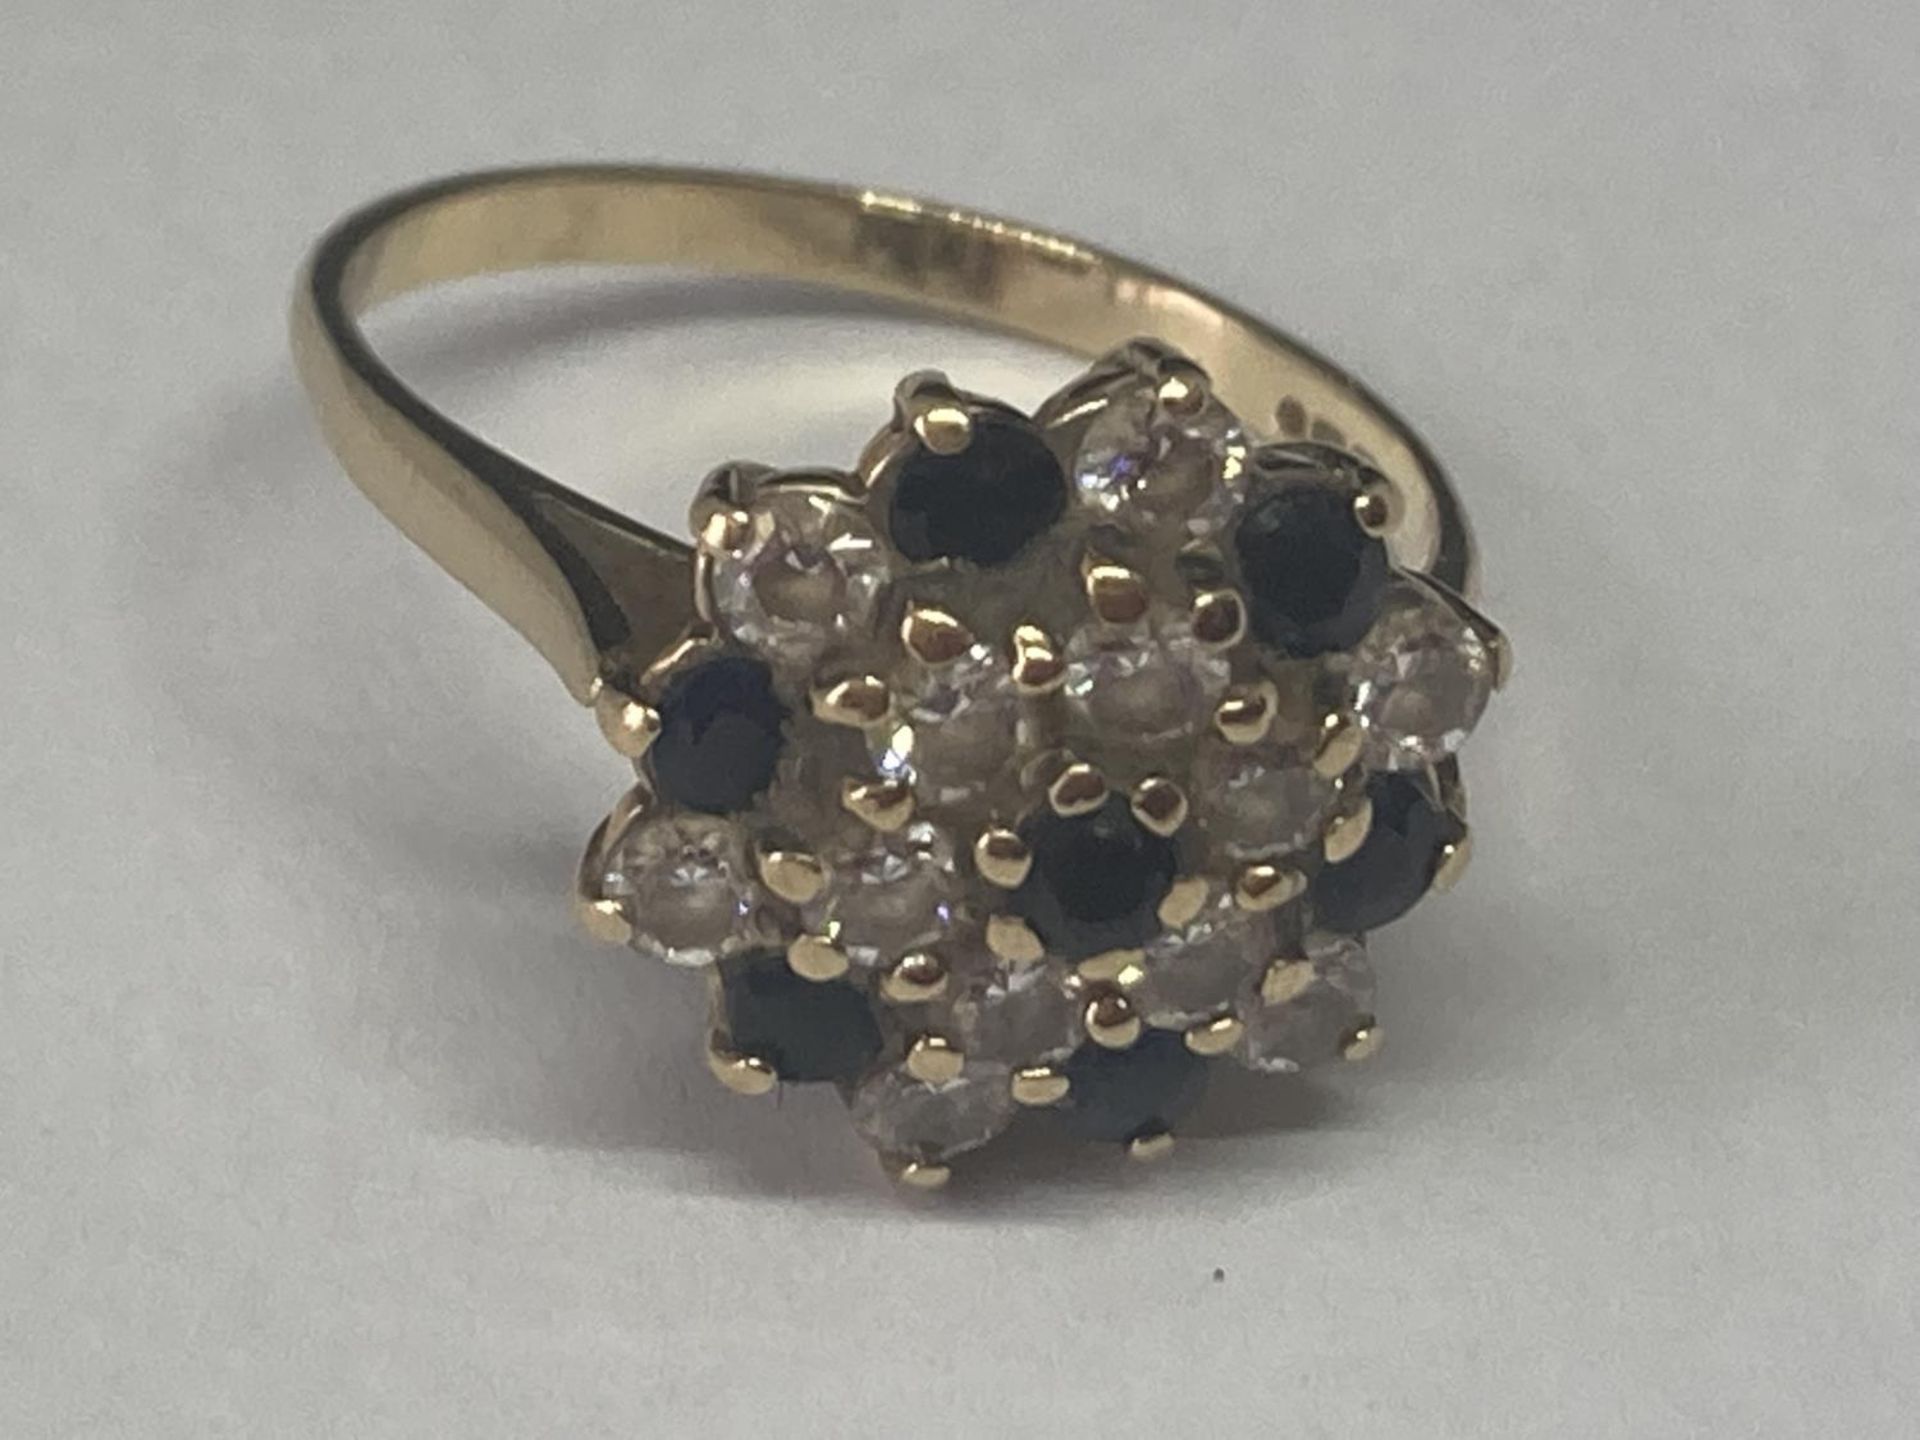 A 9 CARAT GOLD RING WITH SAPPHIRE AND CUBIC ZIRCONIAS IN A CLUSTER DESIGN SIZE M/N - Image 2 of 6